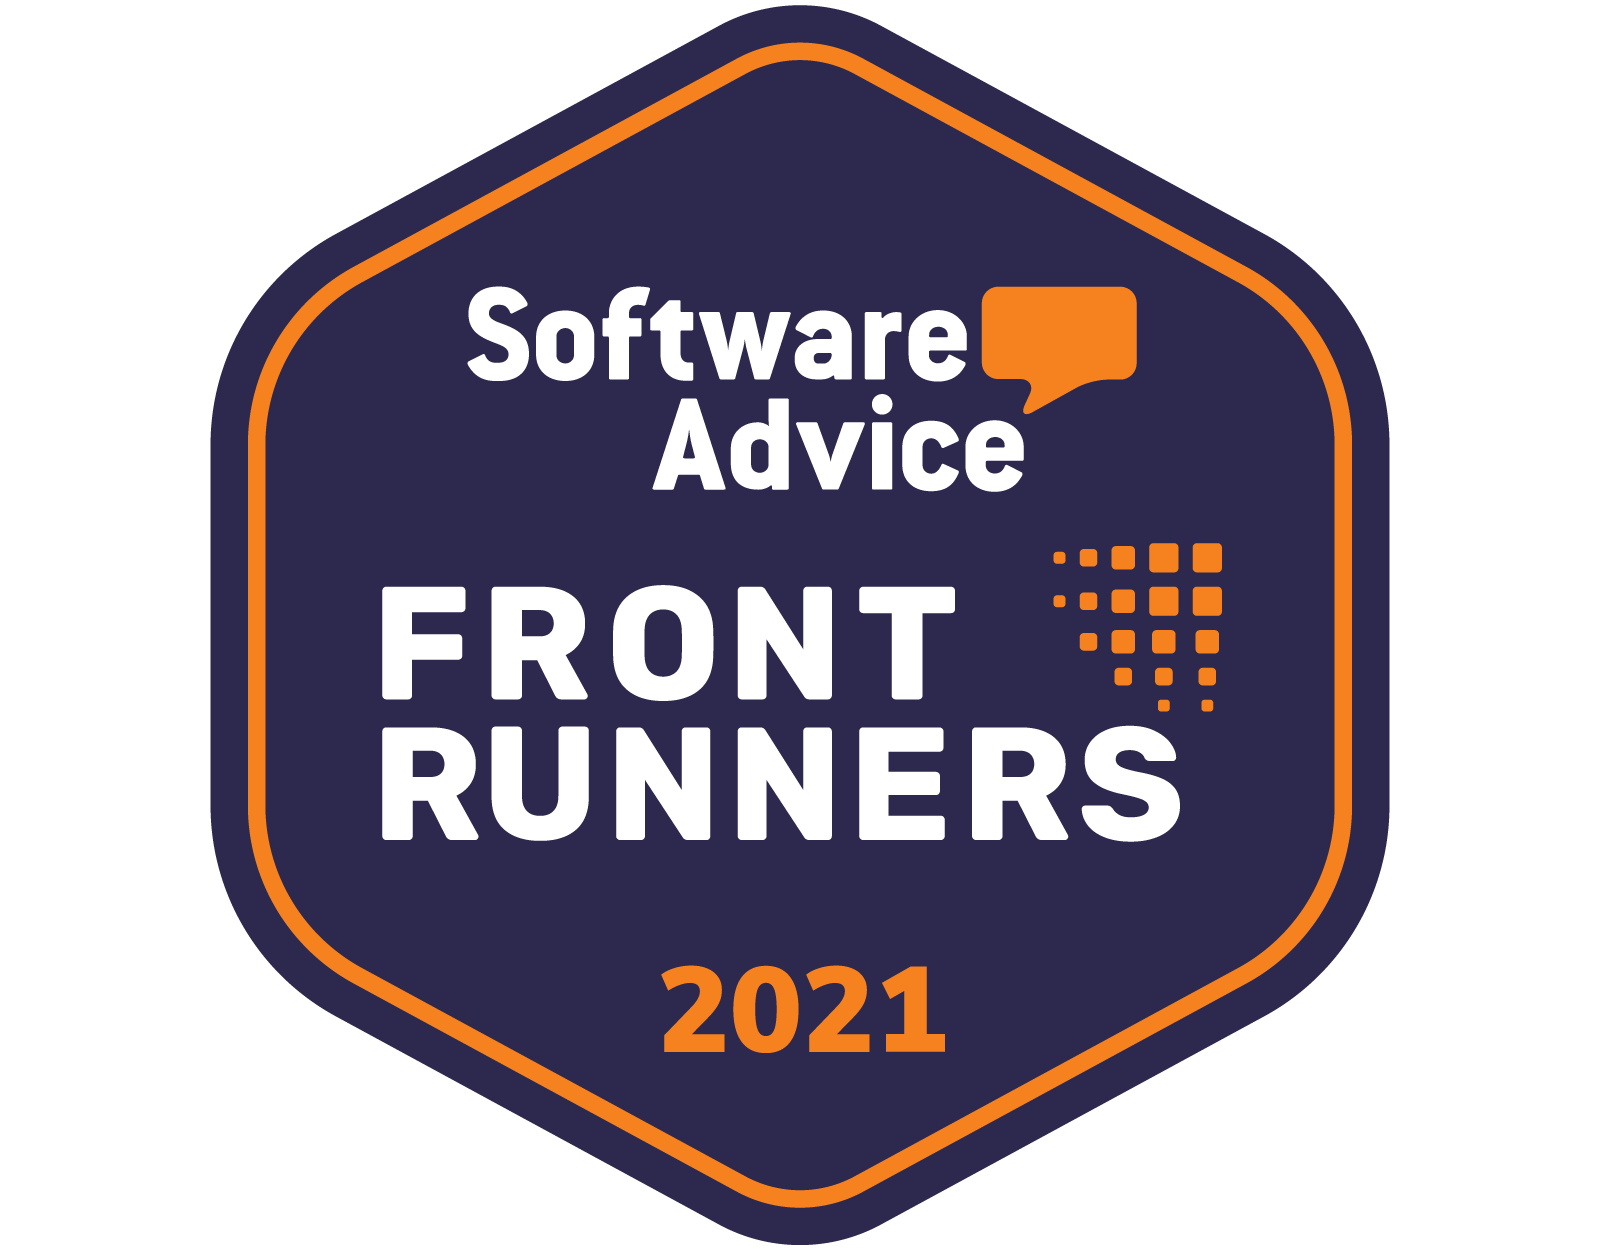 Software Advice Frontrunners for Customer Loyalty Apr-21